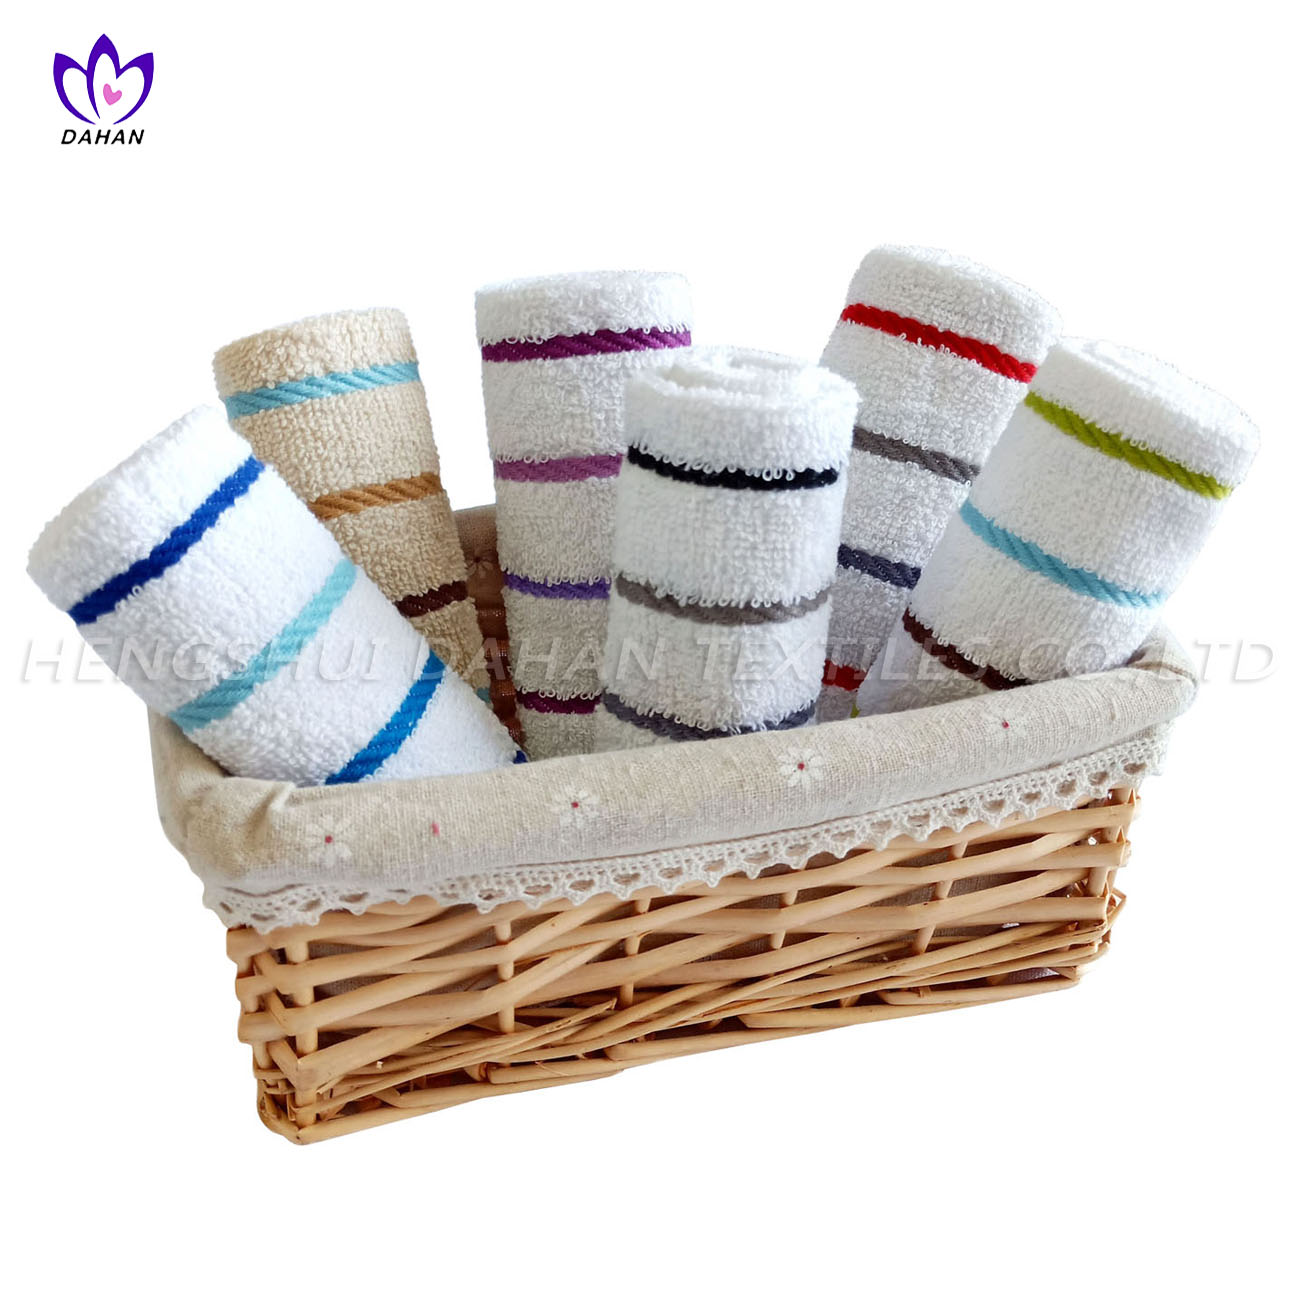 Yarn-dyed cotton kitchen towels